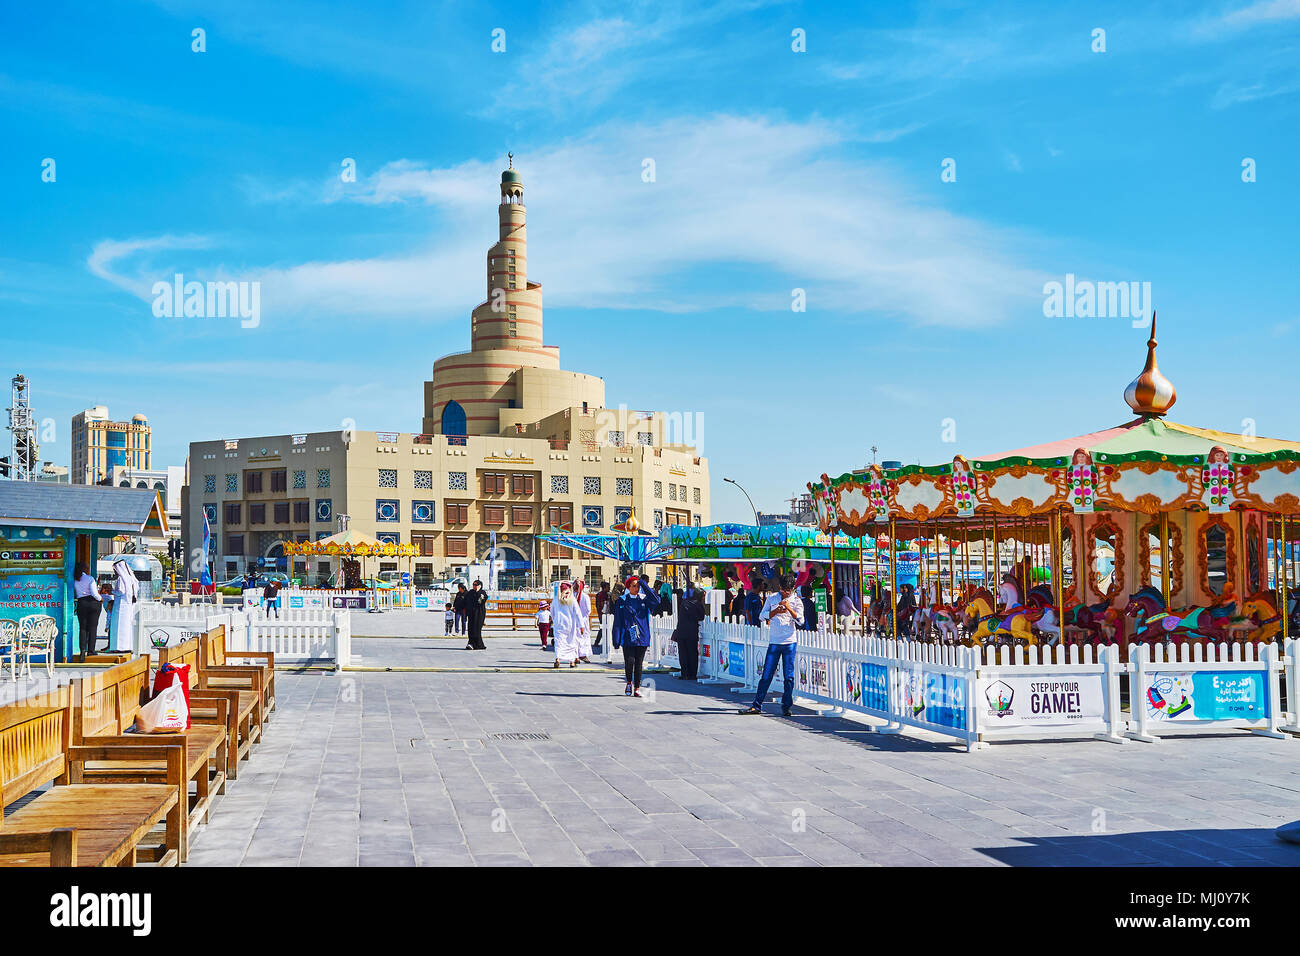 DOHA, QATAR - FEBRUARY 13, 2018: The street of Al Souq district with carousels of Luna park and the scenic building of Al Fanar mosque on the backgrou Stock Photo